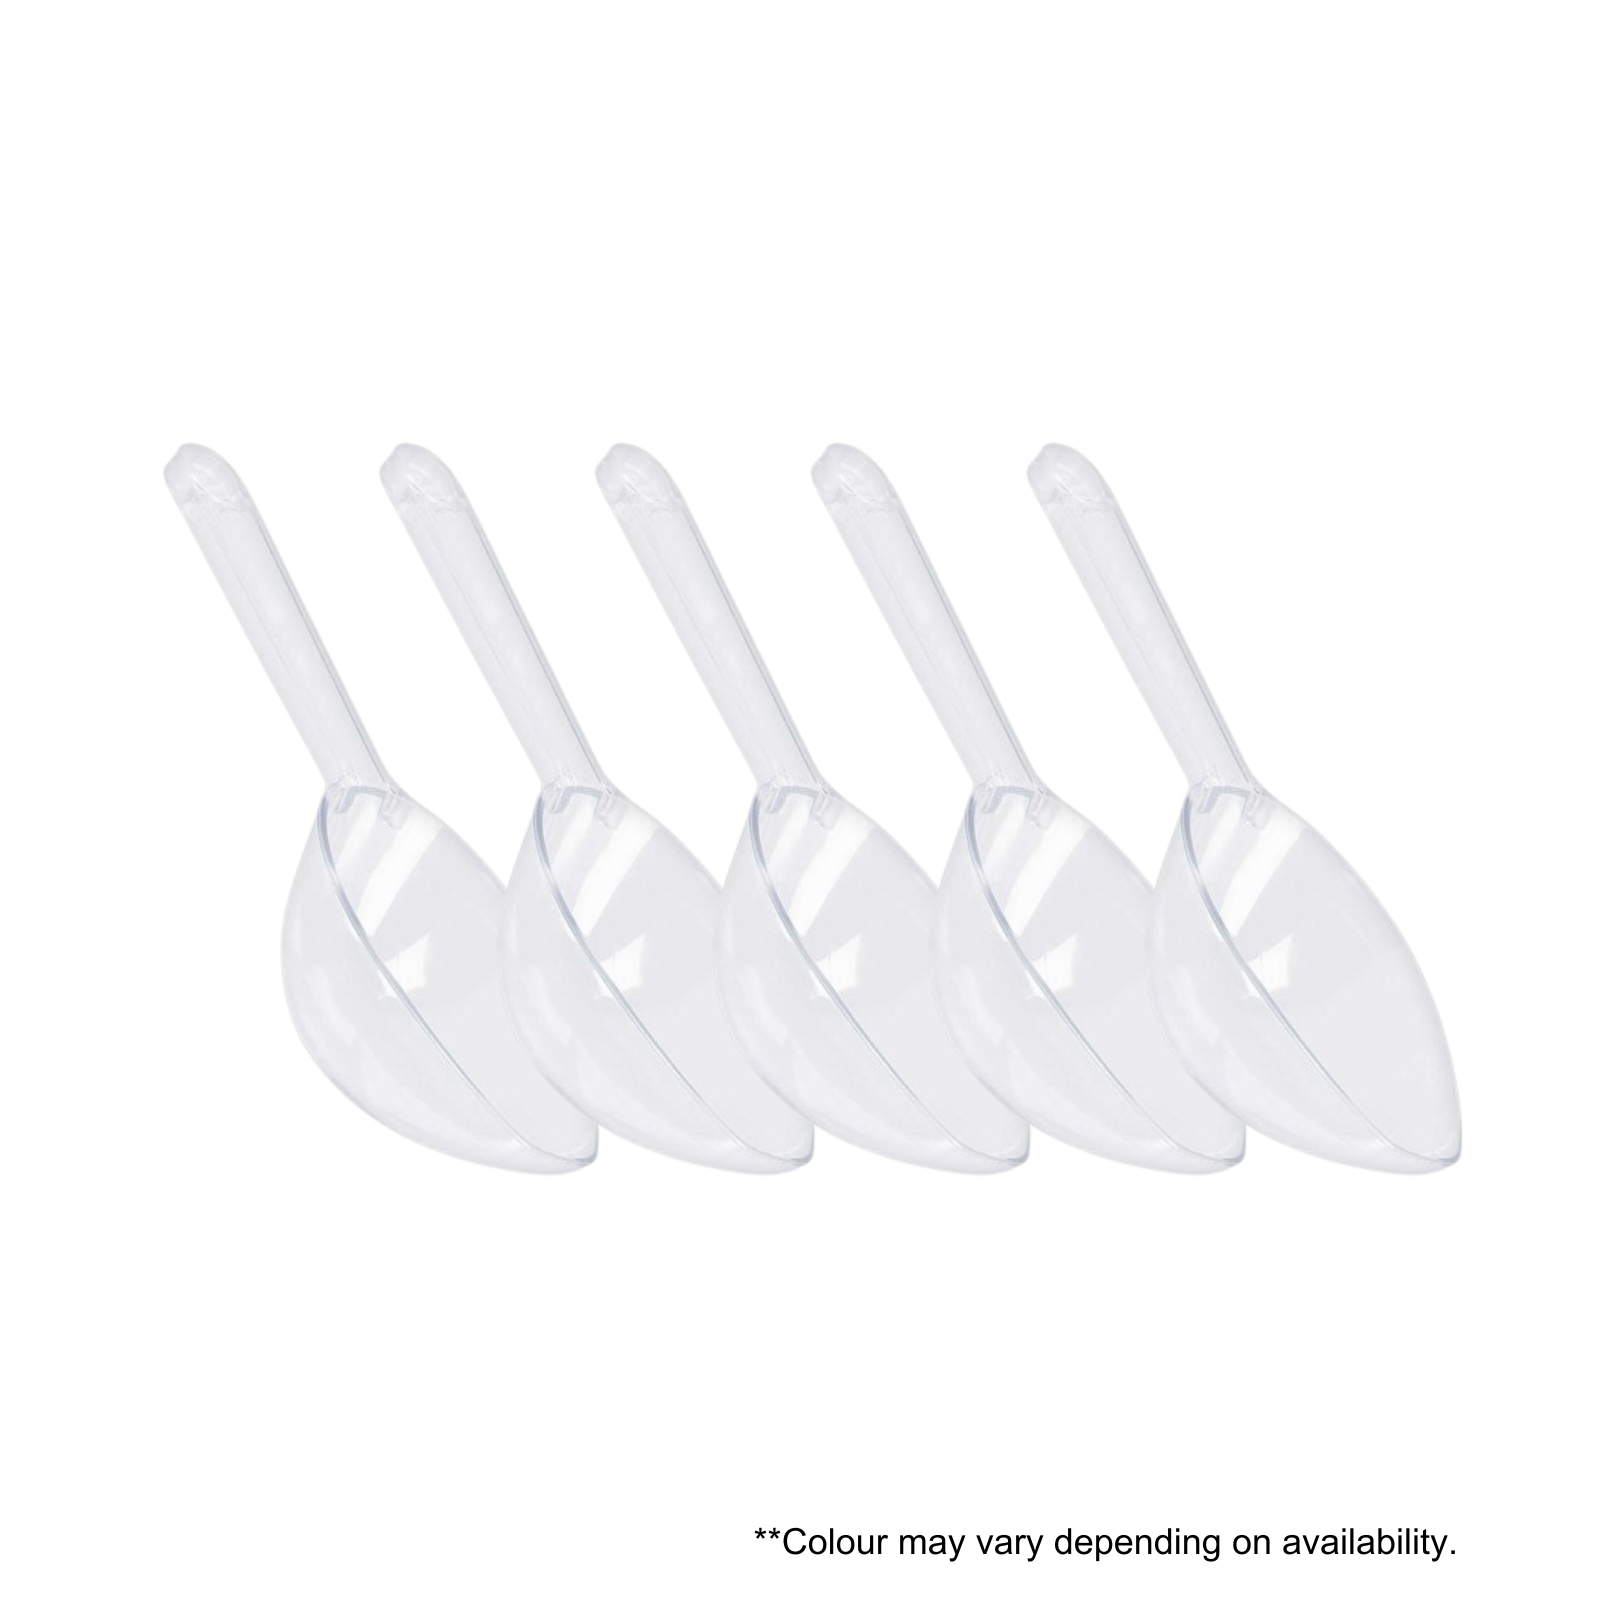 5 x 50ml Reusable Scoops For Esthemax Hydrojelly Mask on a white background uploaded on SPA Circle Brands product listing page